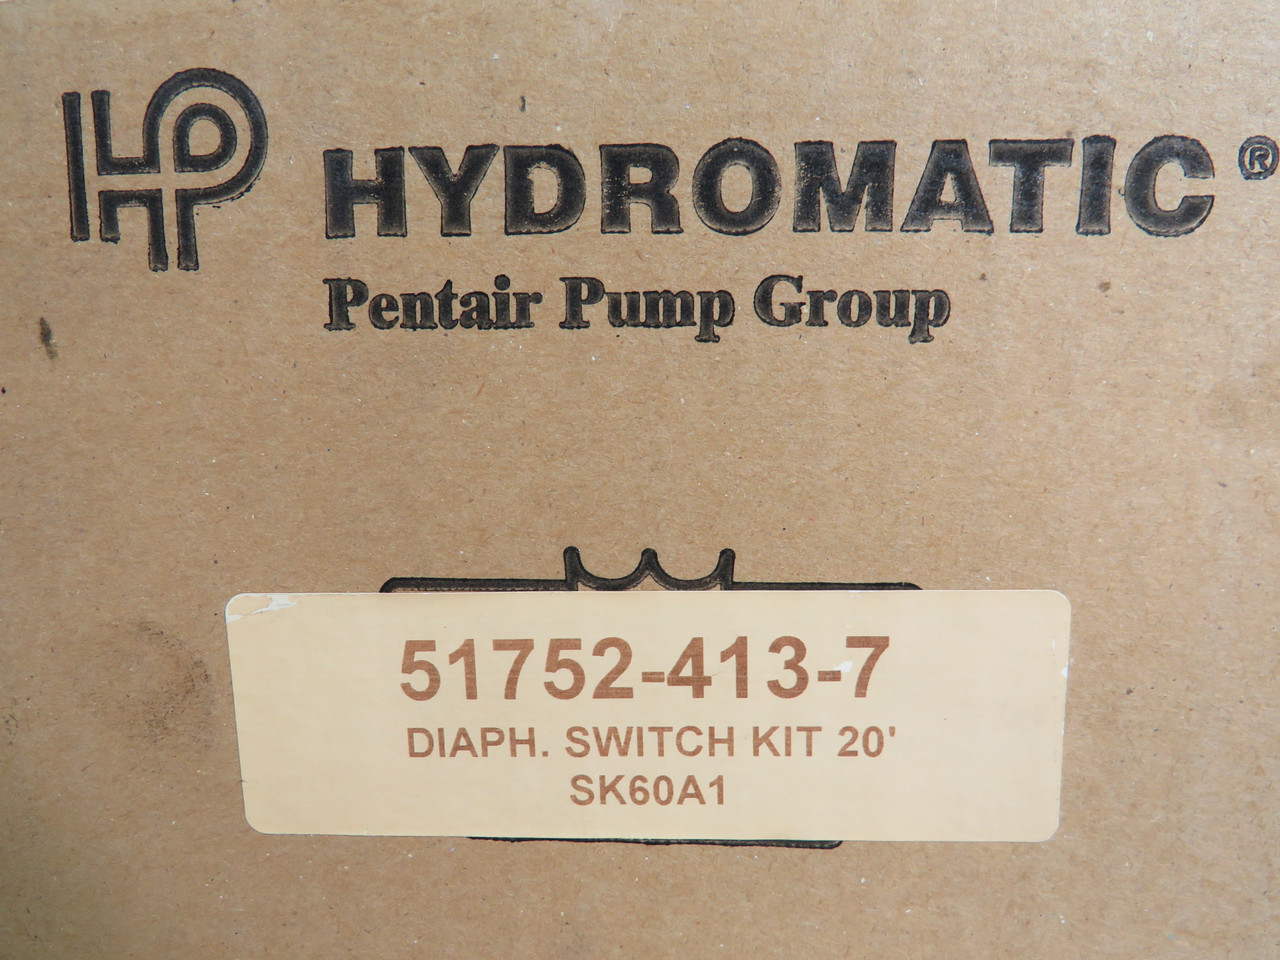 Hydromatic 51752-413-7 Diaphragm Switch 115V 20' for SK60A1 Pump *SEALED* NEW